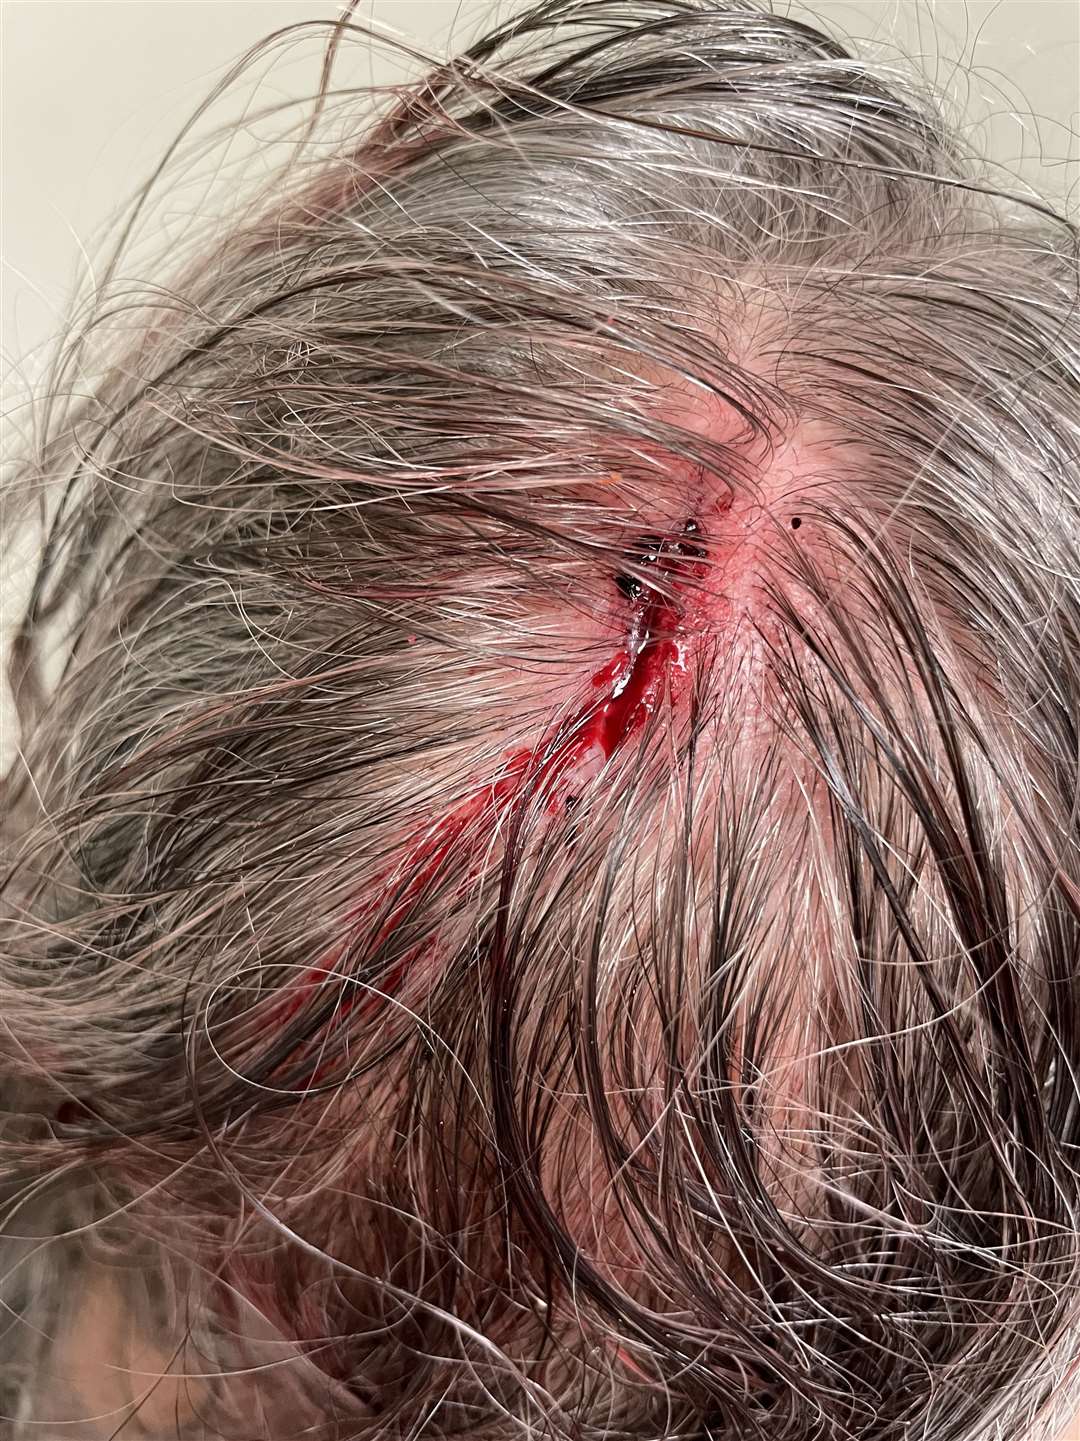 Mark needed staples in his head following the attack